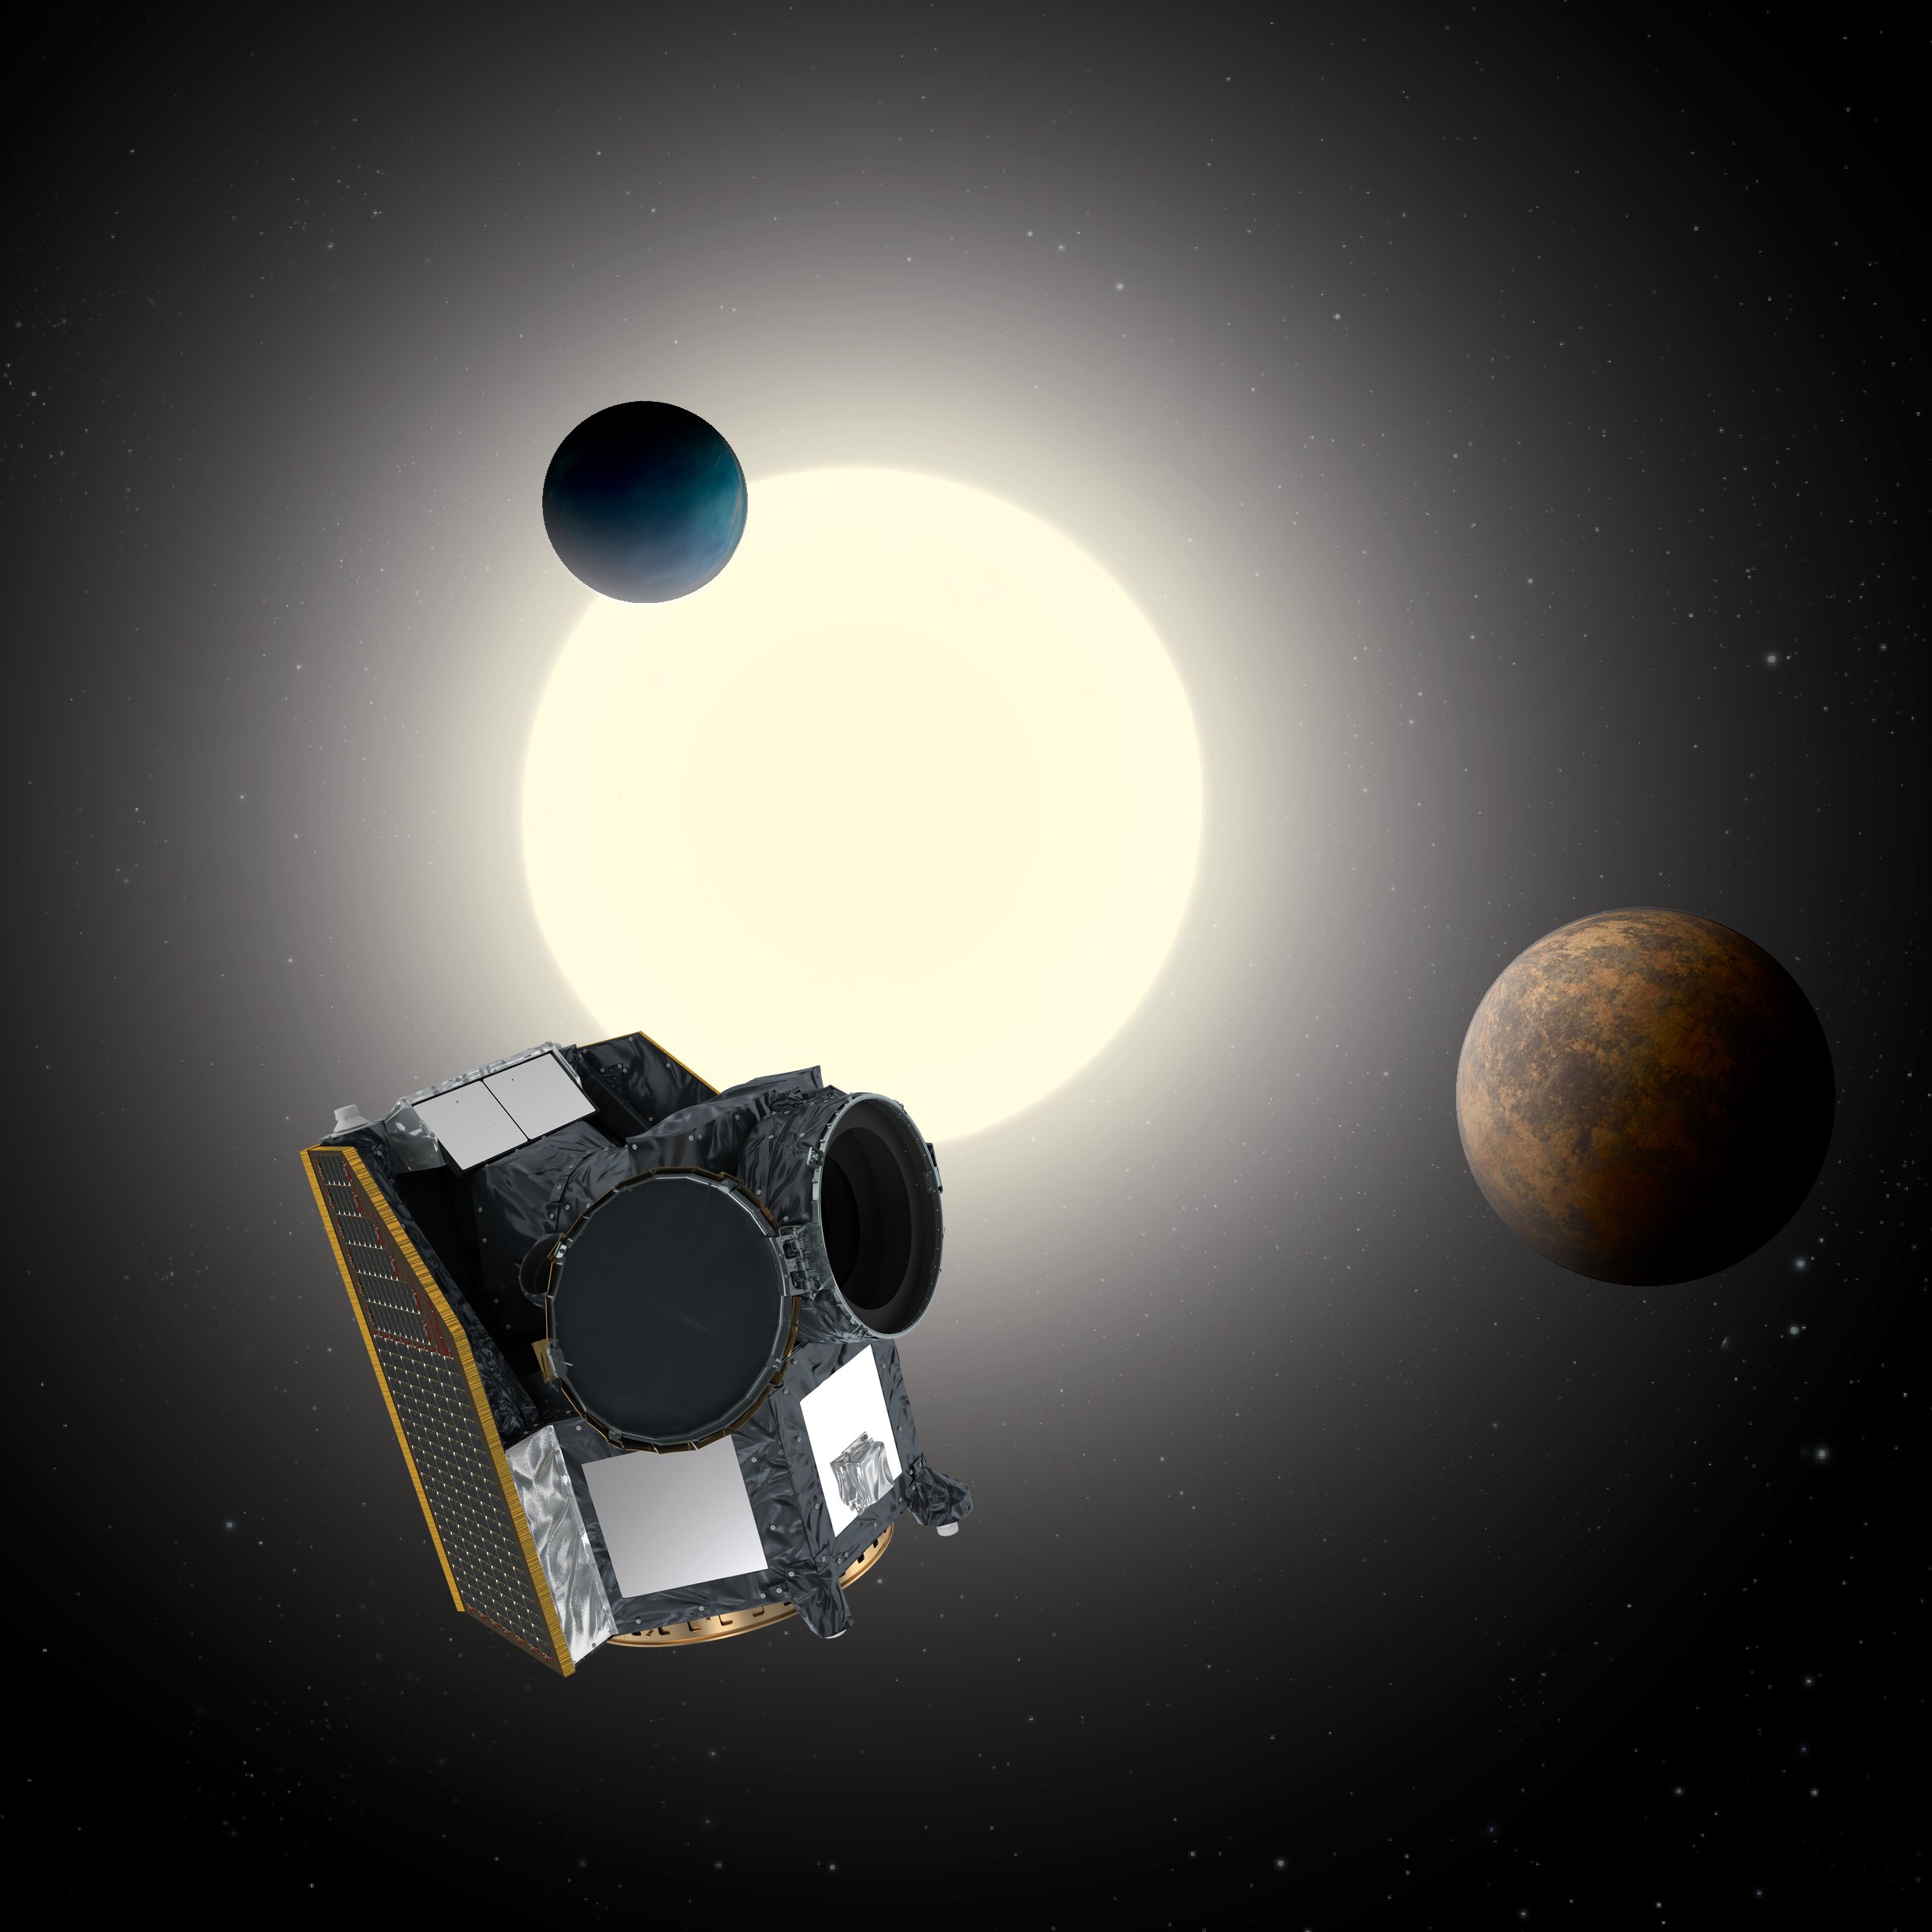 CHEOPS_Exoplanet_mission_3_sqr_low.jpg